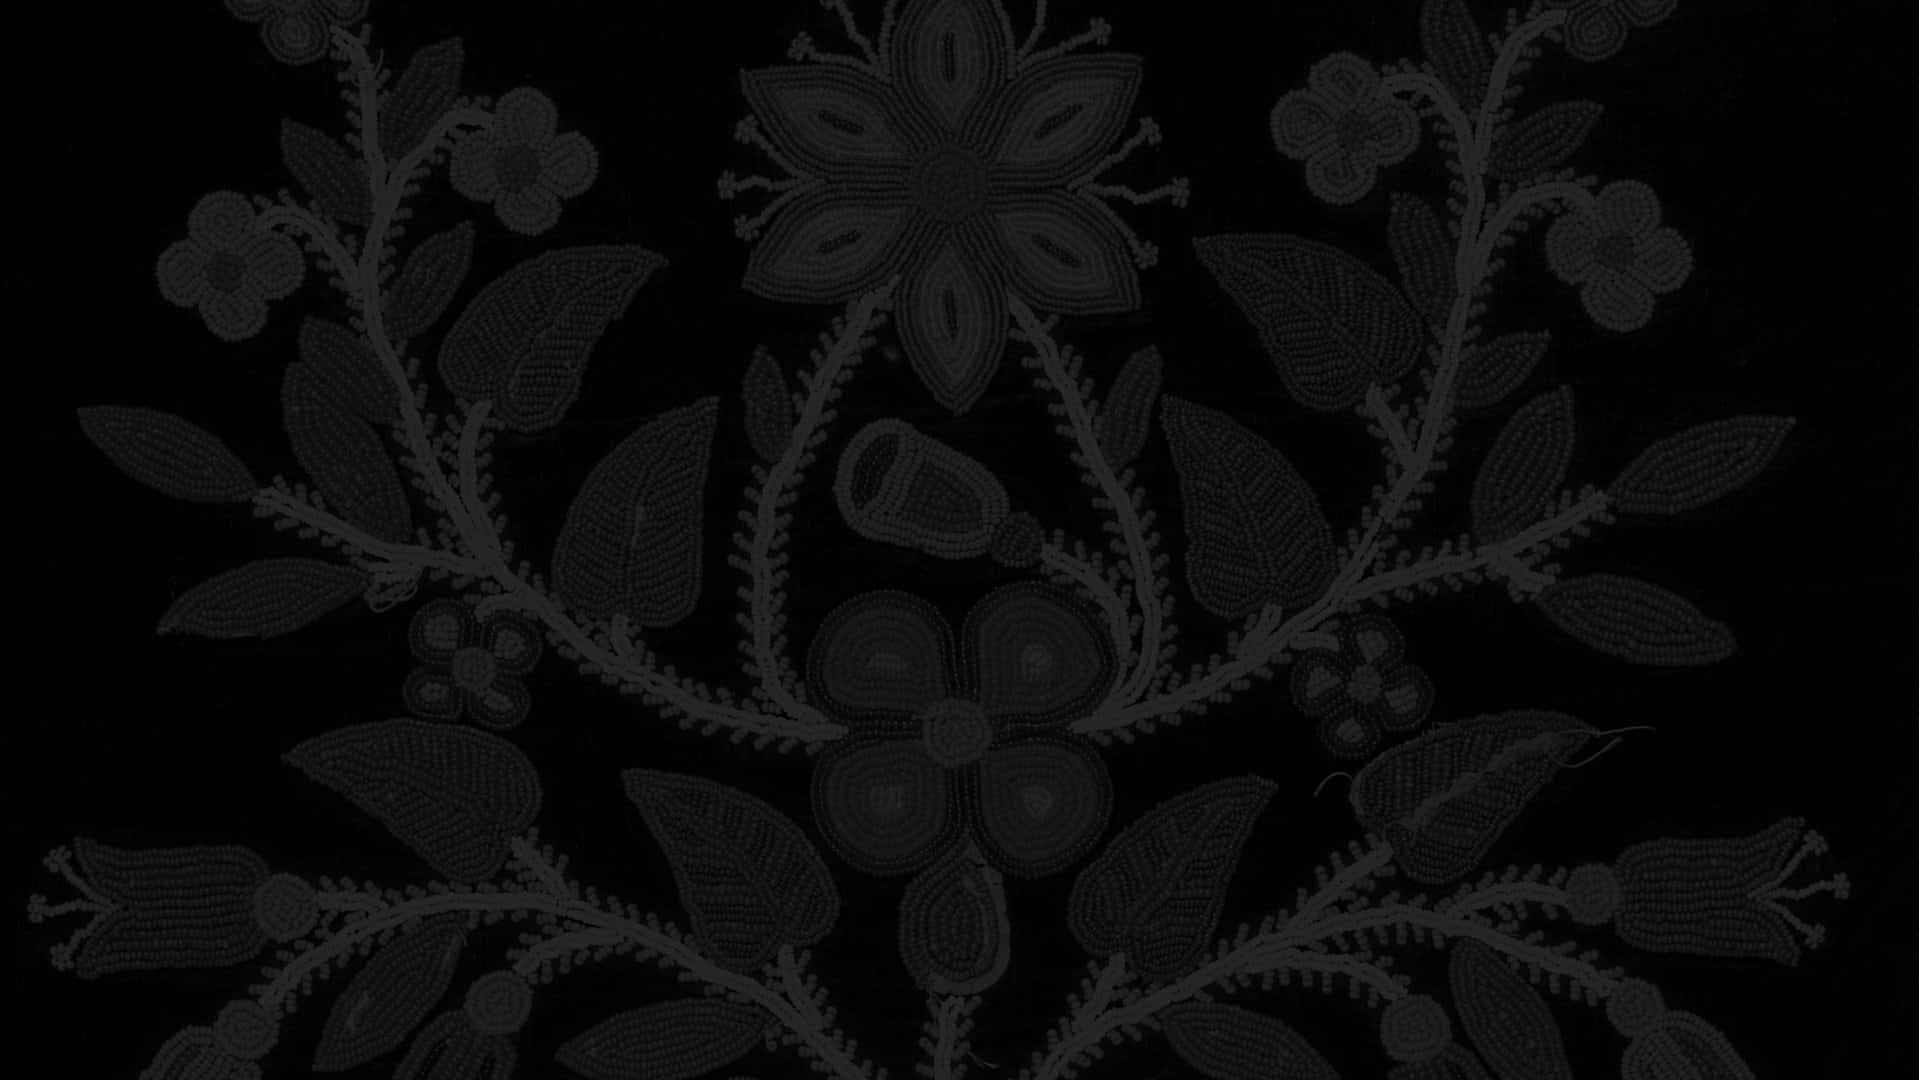 A Black And White Floral Pattern On A Black Background